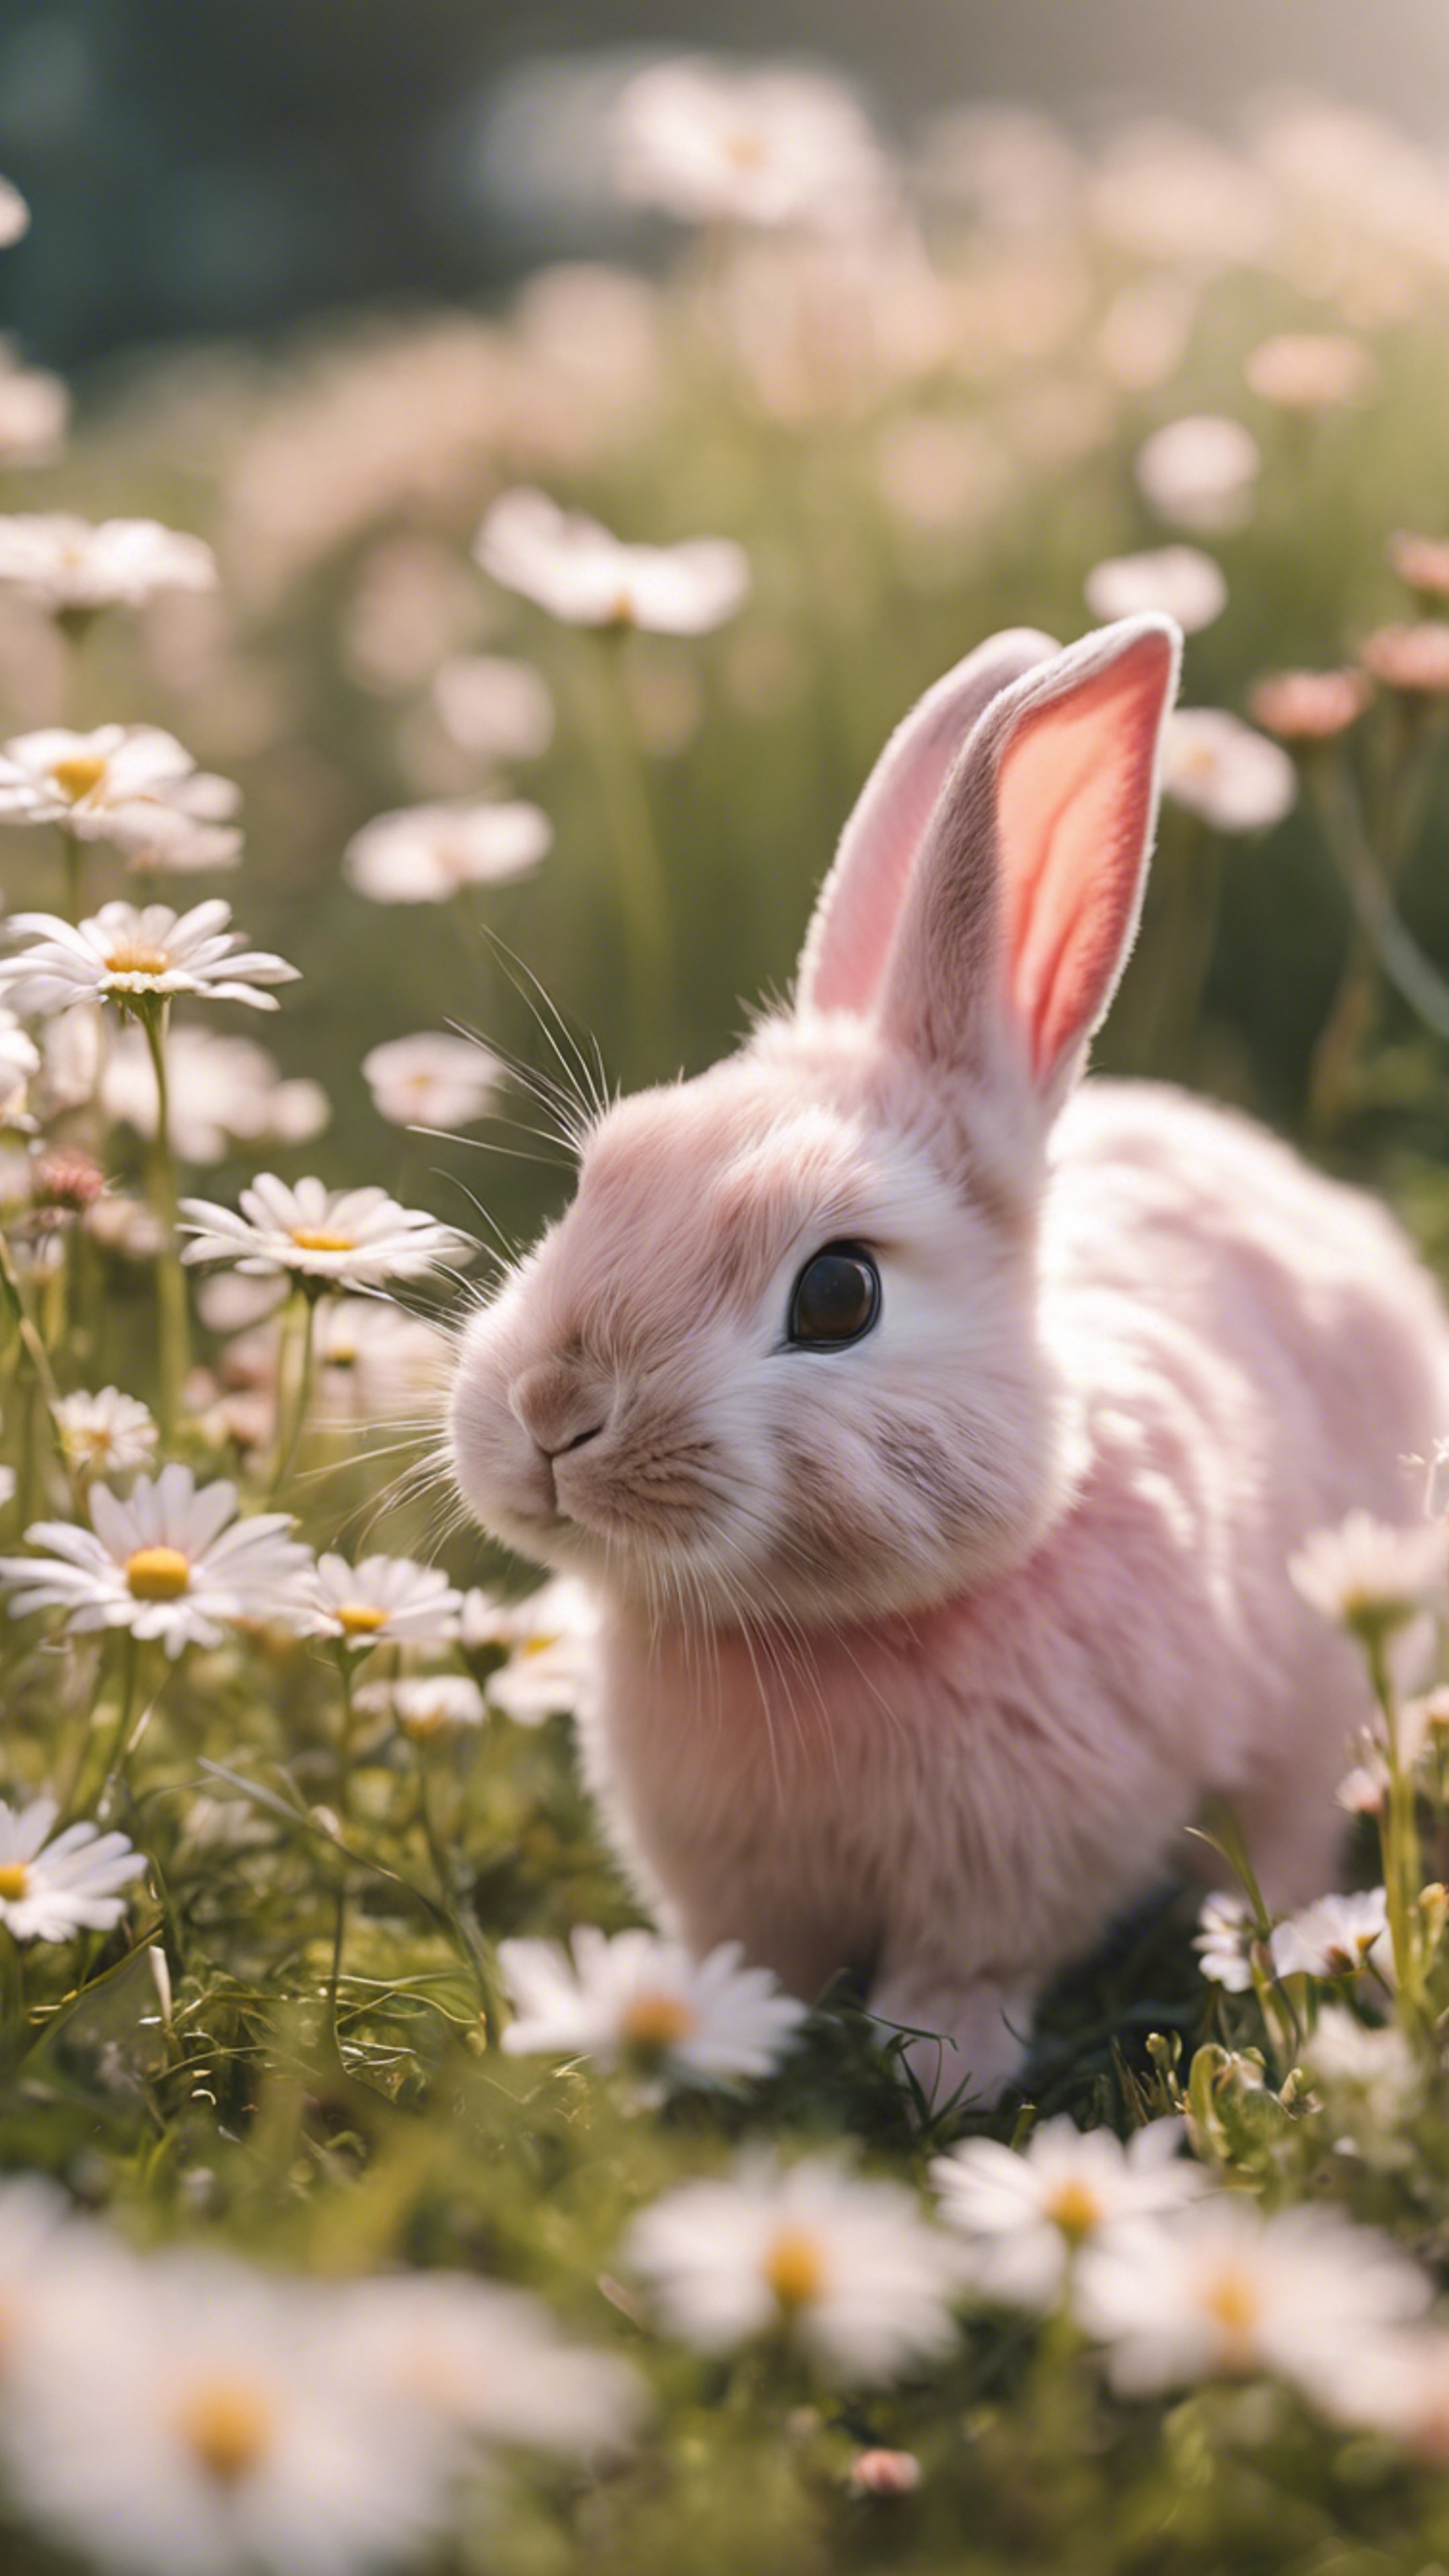 A pack of blush pink, Kawaii style rabbits happily playing in a field of daisies. Behang[cf36497c89454393a51d]